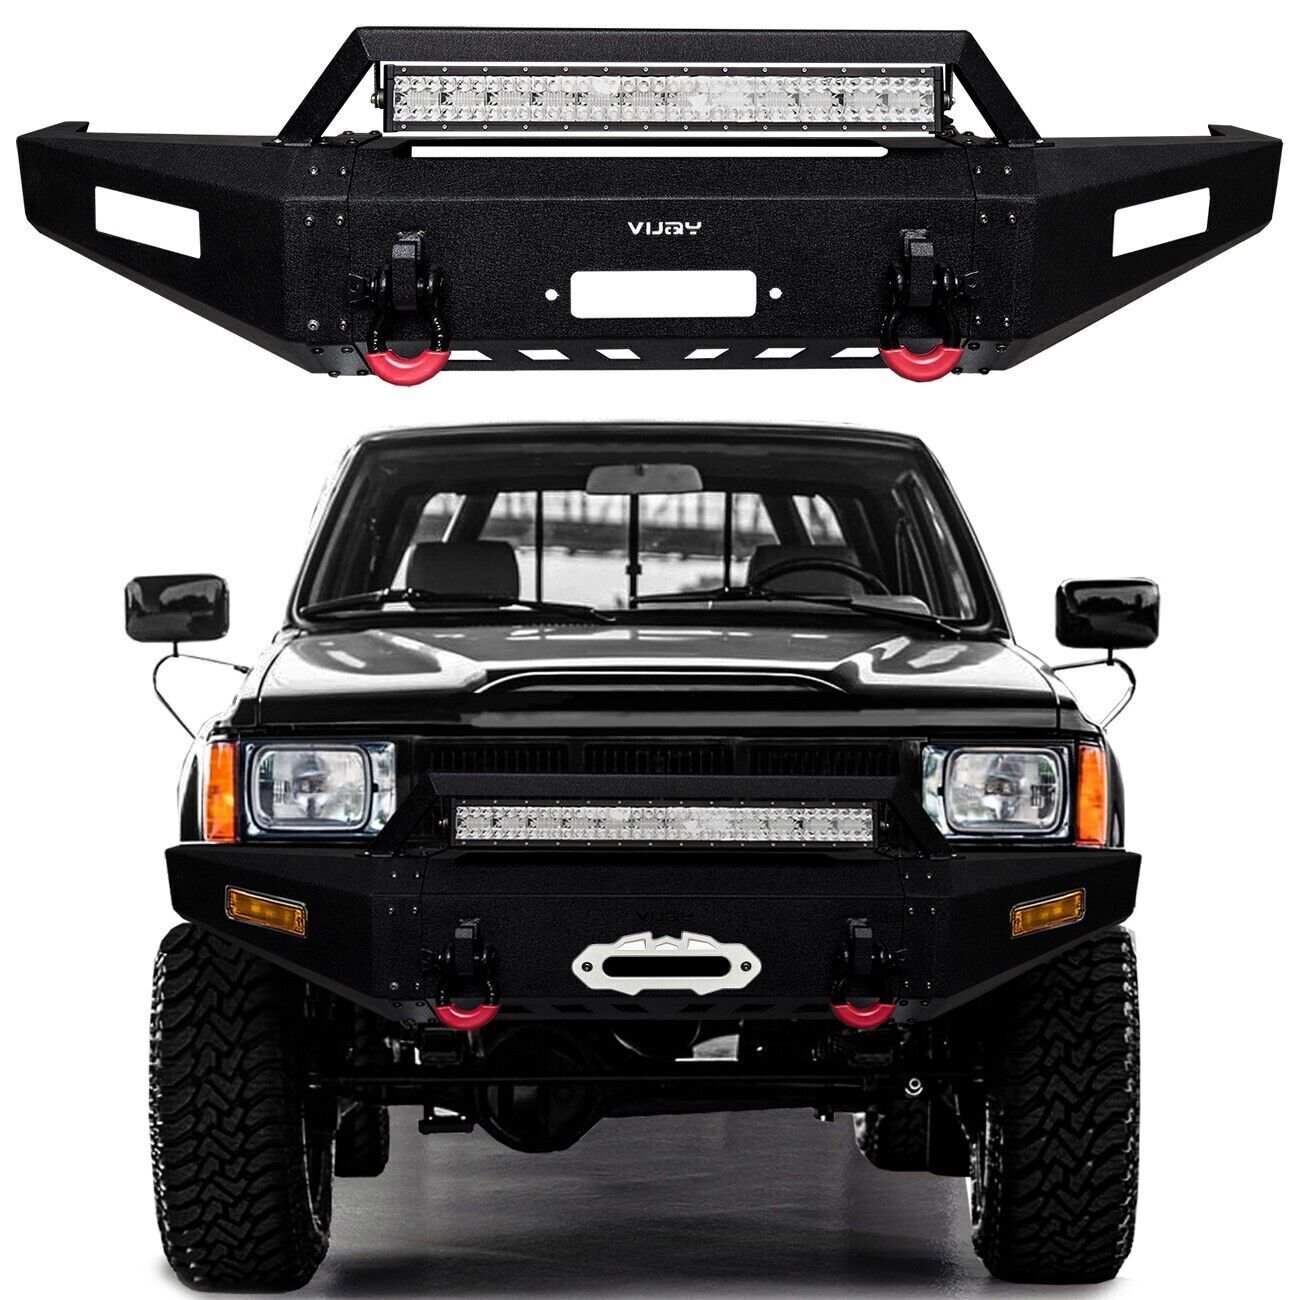 Vijay Fit 1989-1995 Toyota Pickup Steel Front Bumper with D-Rings and LightBar